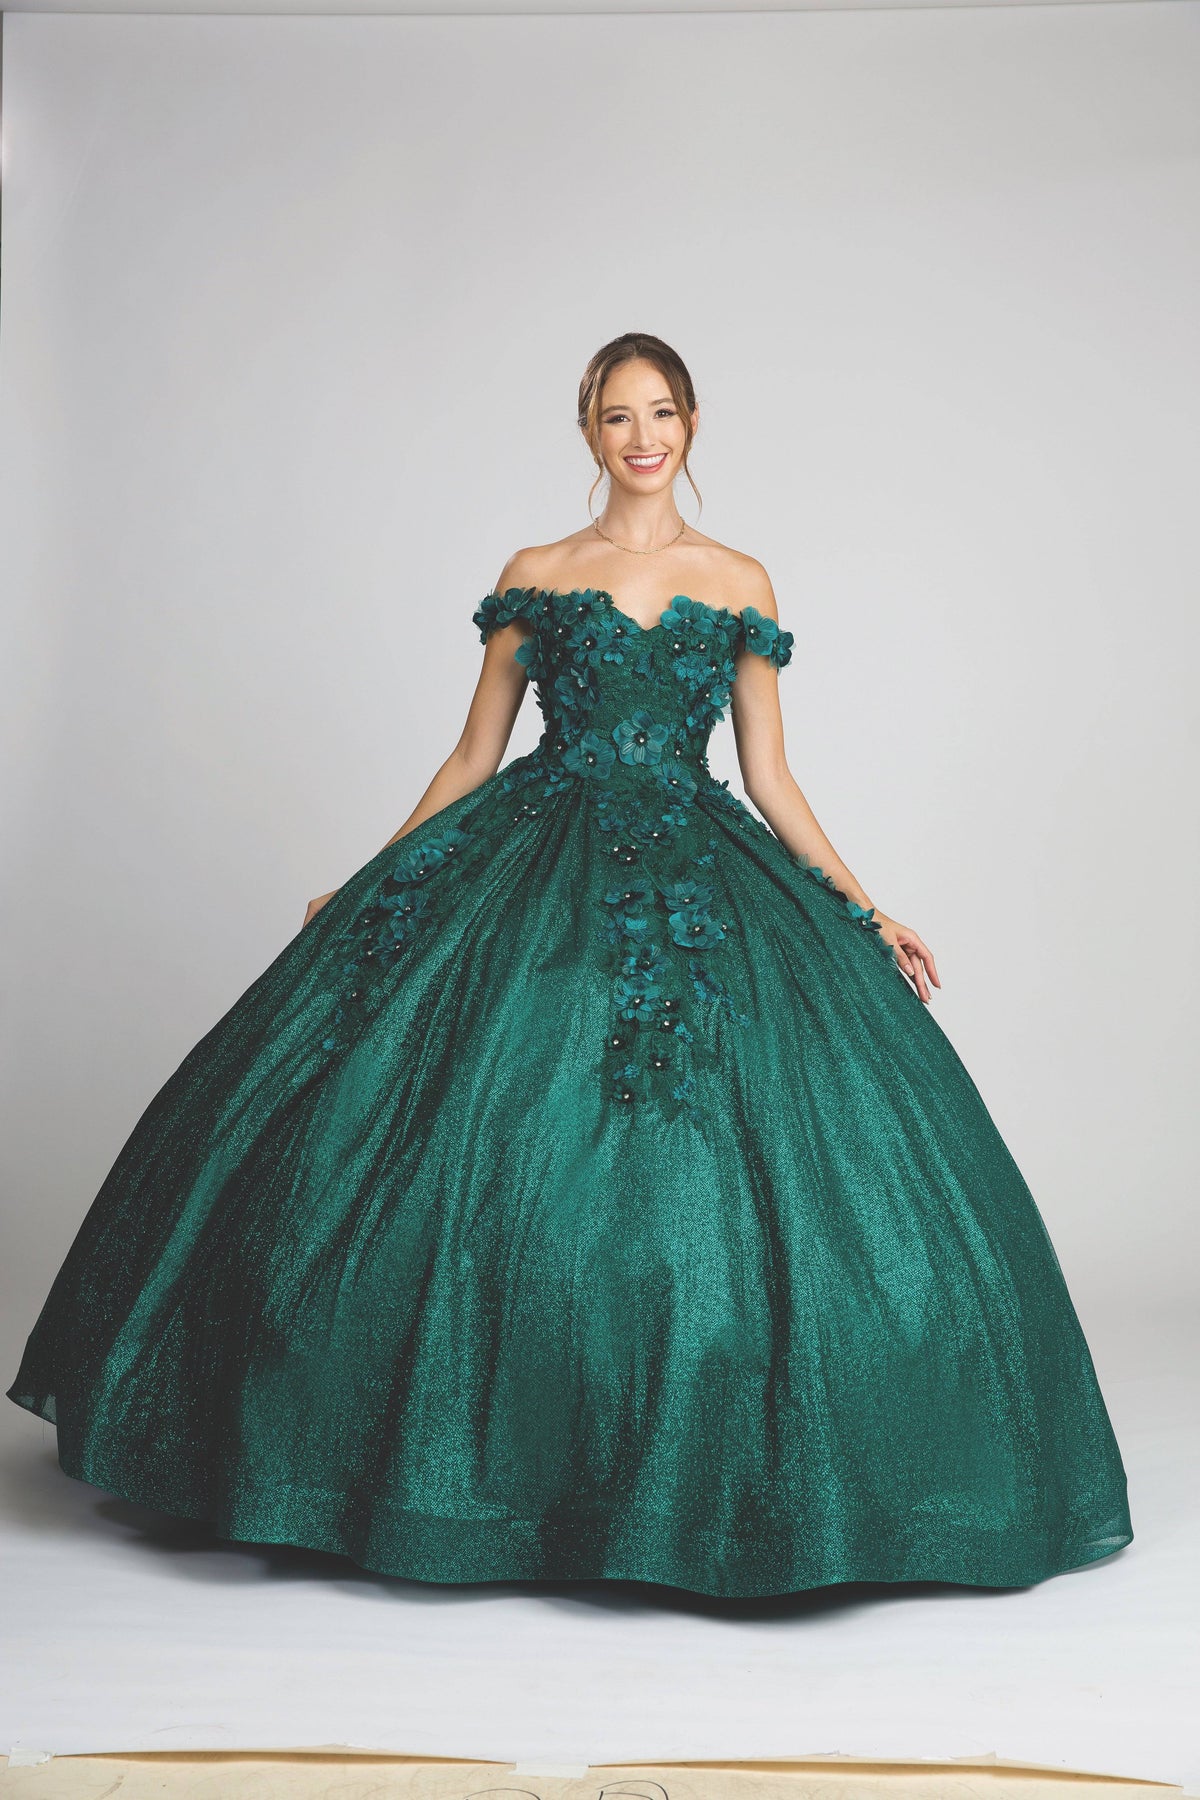 Fiesta 10267 Glittering Floral Ball Gown - NORMA REED